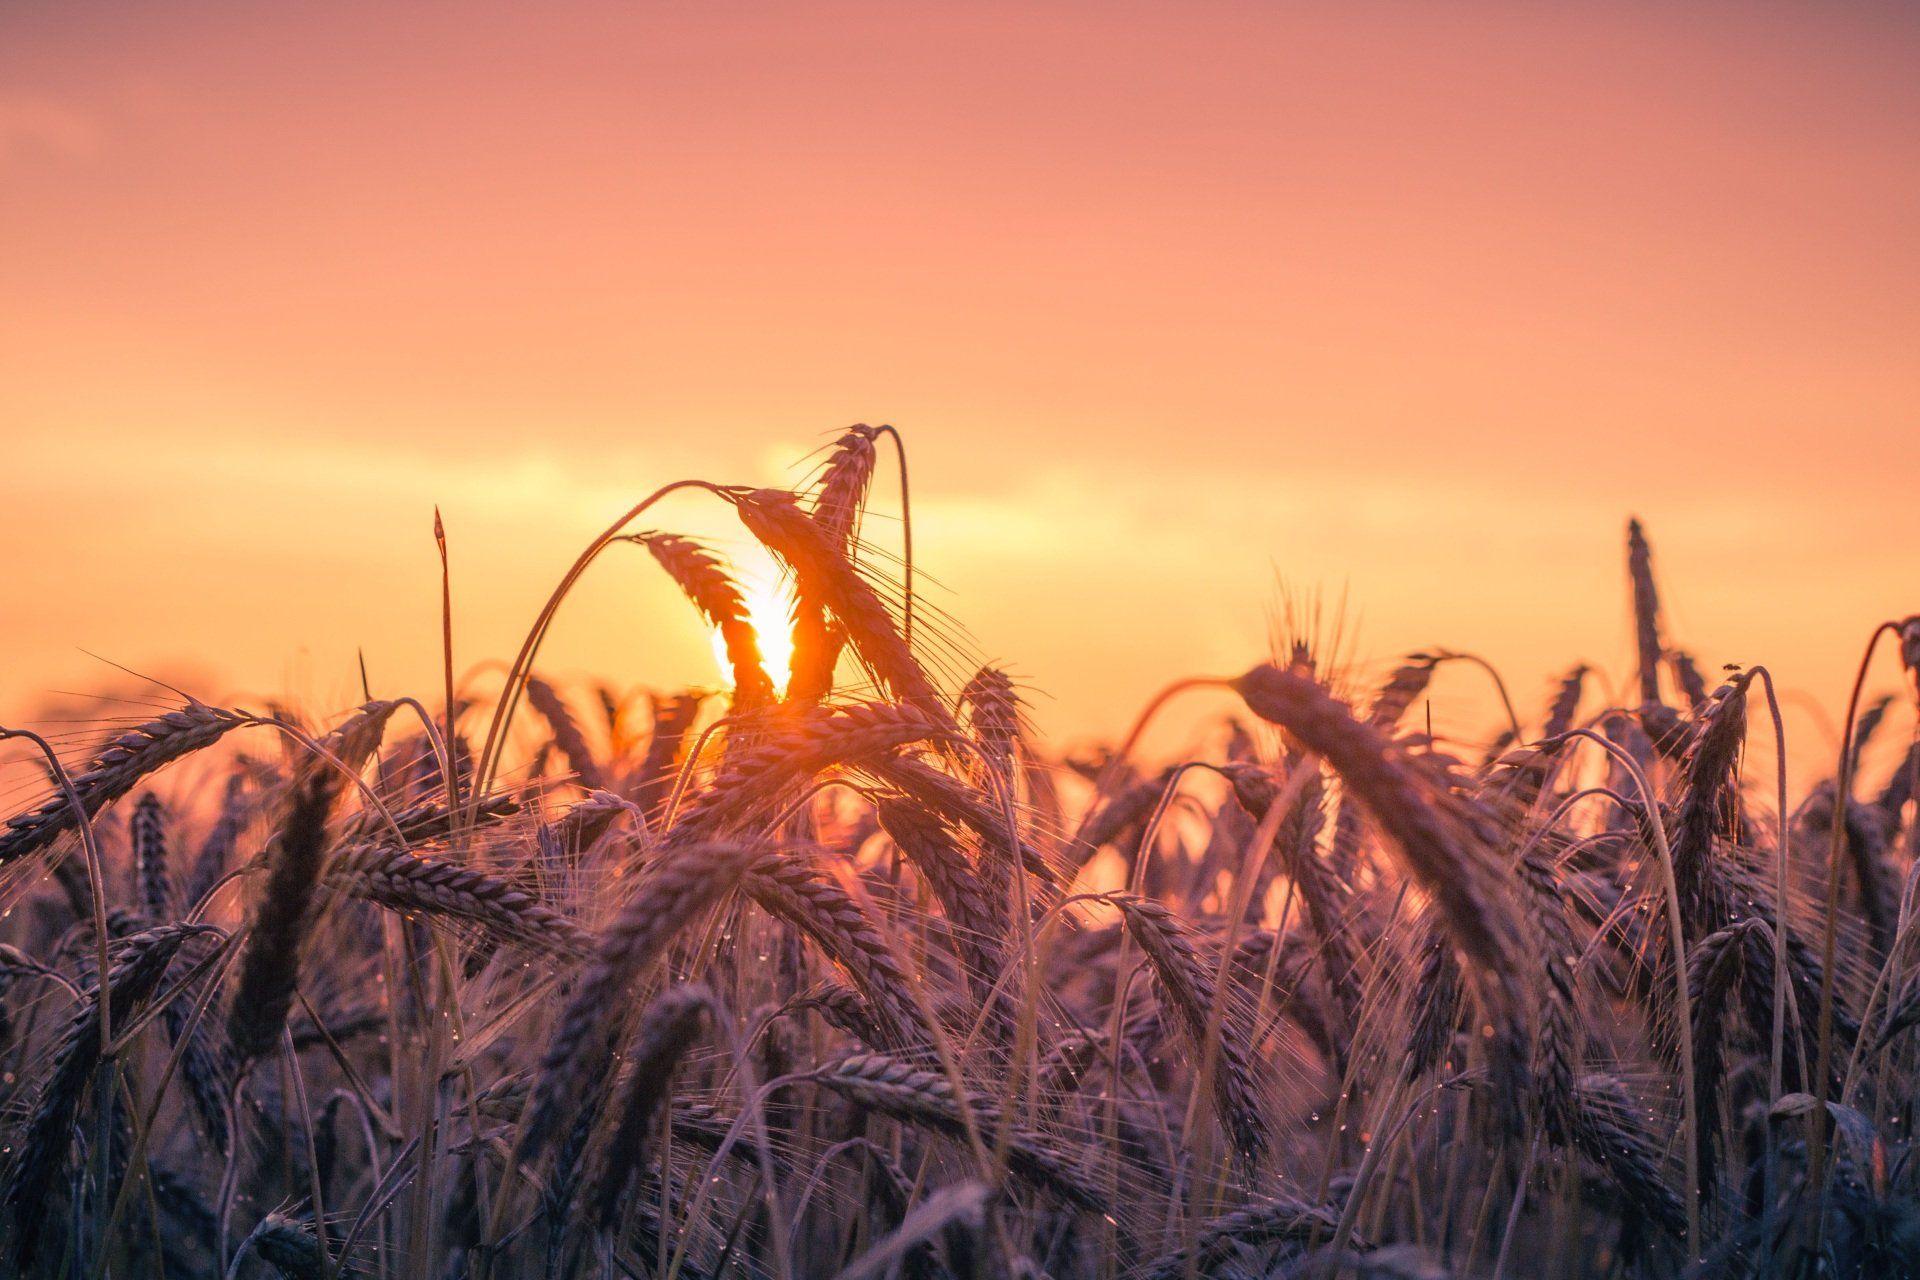 A field of wheat with the sun setting behind it